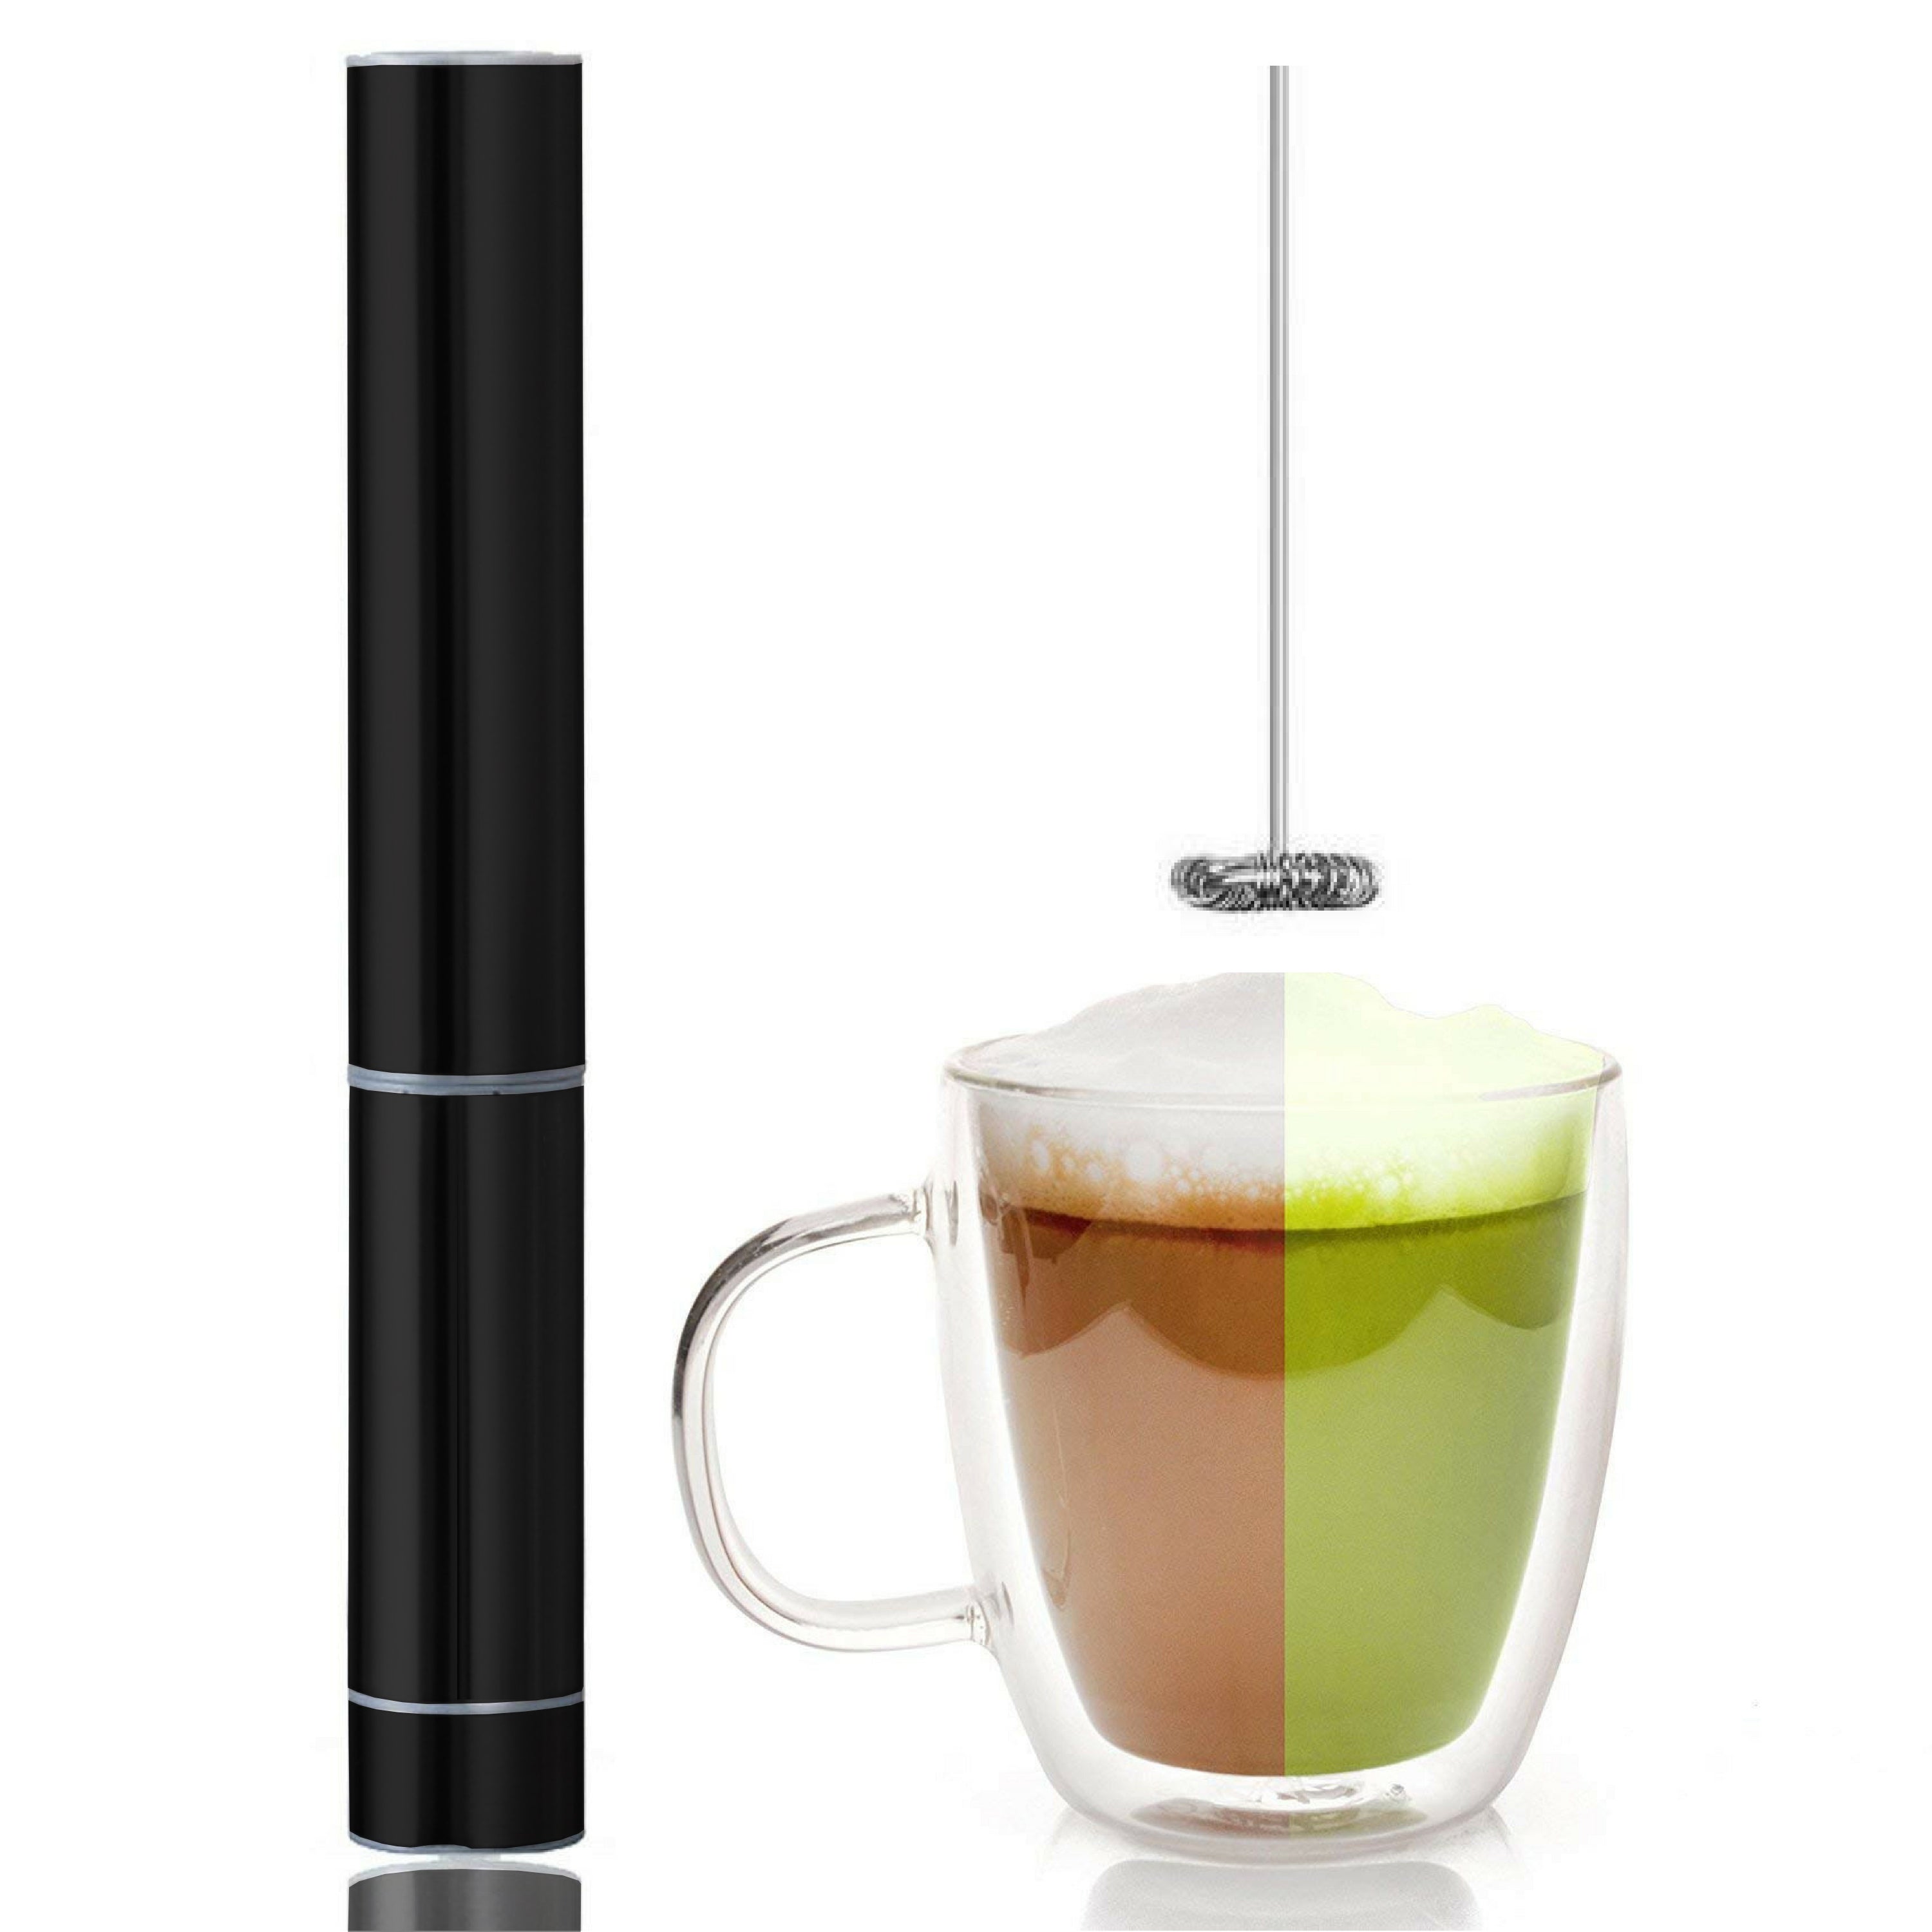  Milk Frother Handheld, Battery Operated Travel Coffee